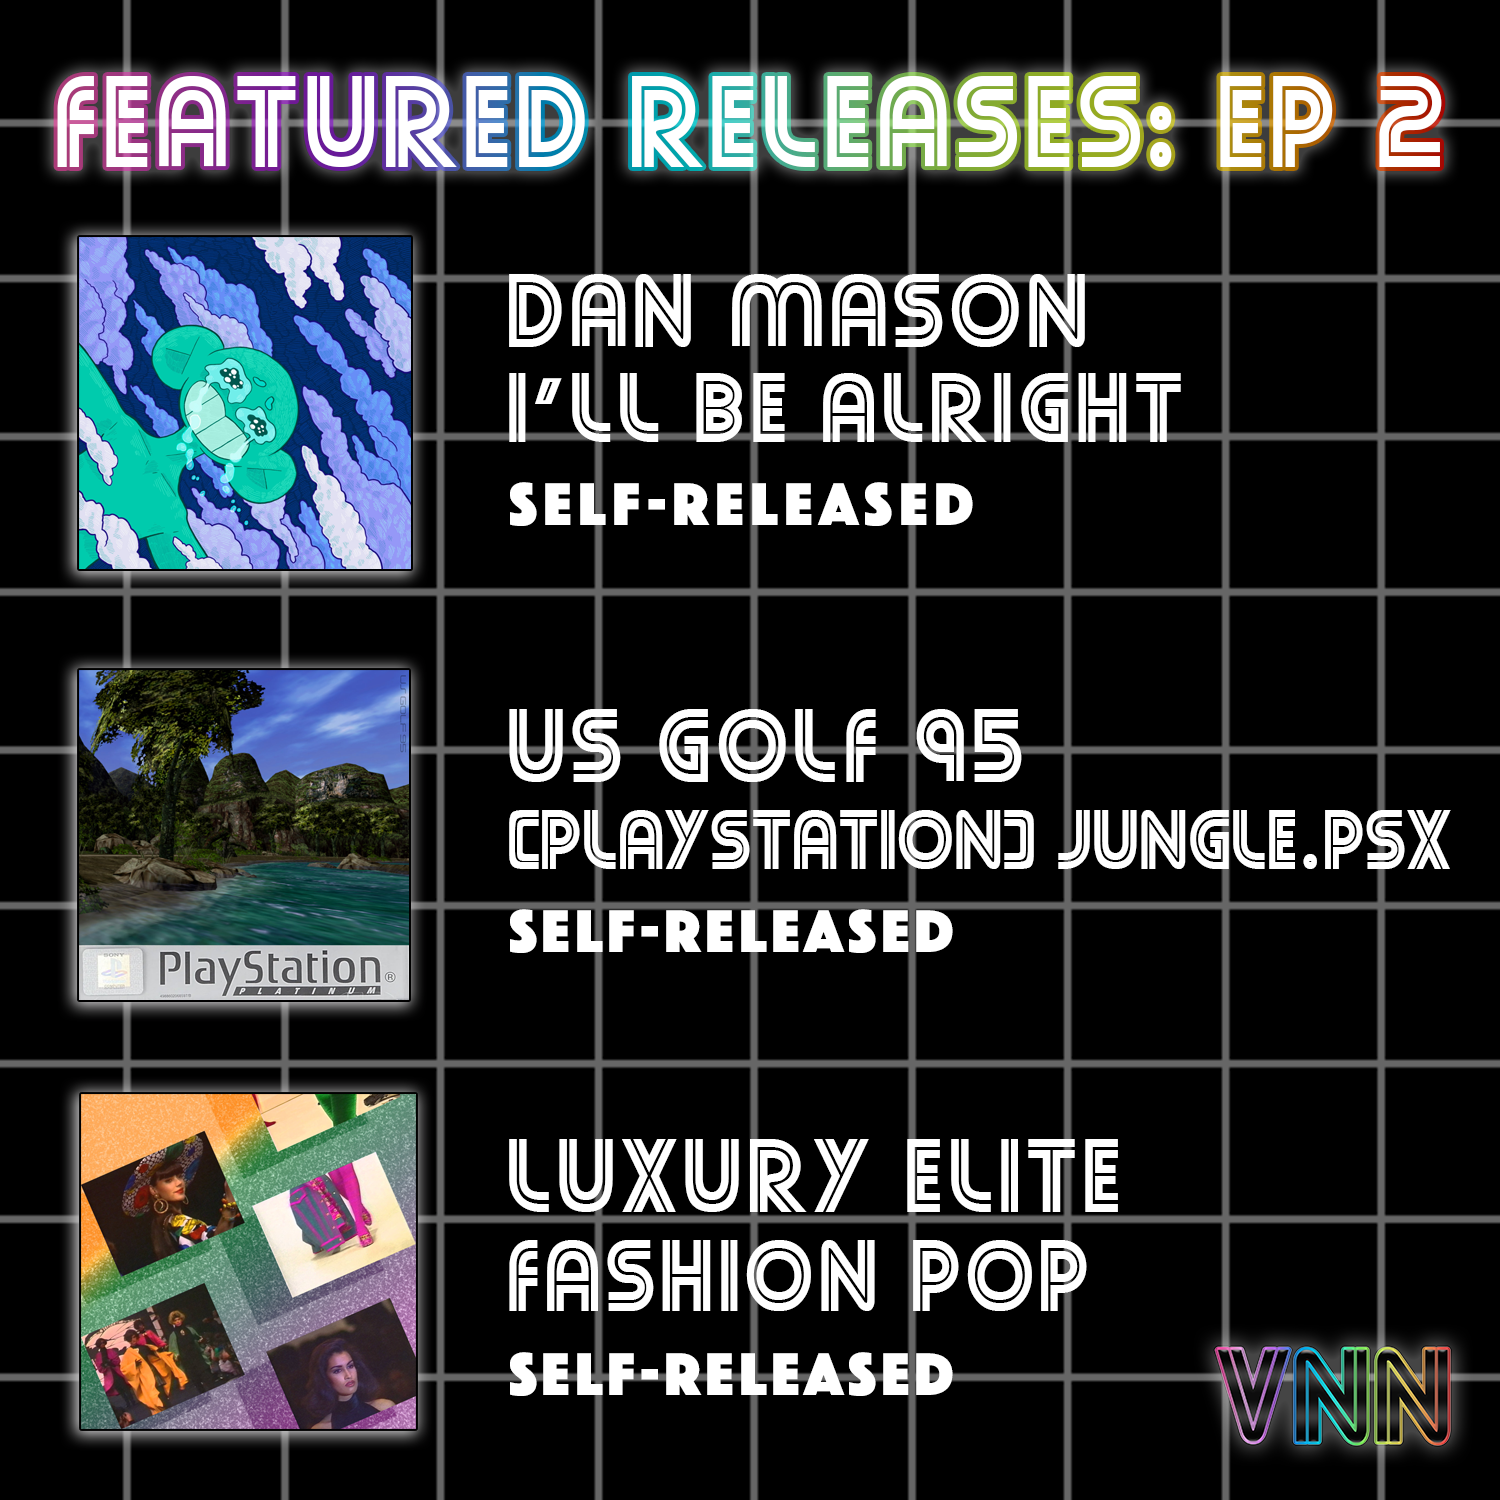 Featured Releases: Dan Mason - I'll Be Alright, US Golf 95 - [PlayStation]jungle.psx & luxury elite - fashion pop (Ep. 2)